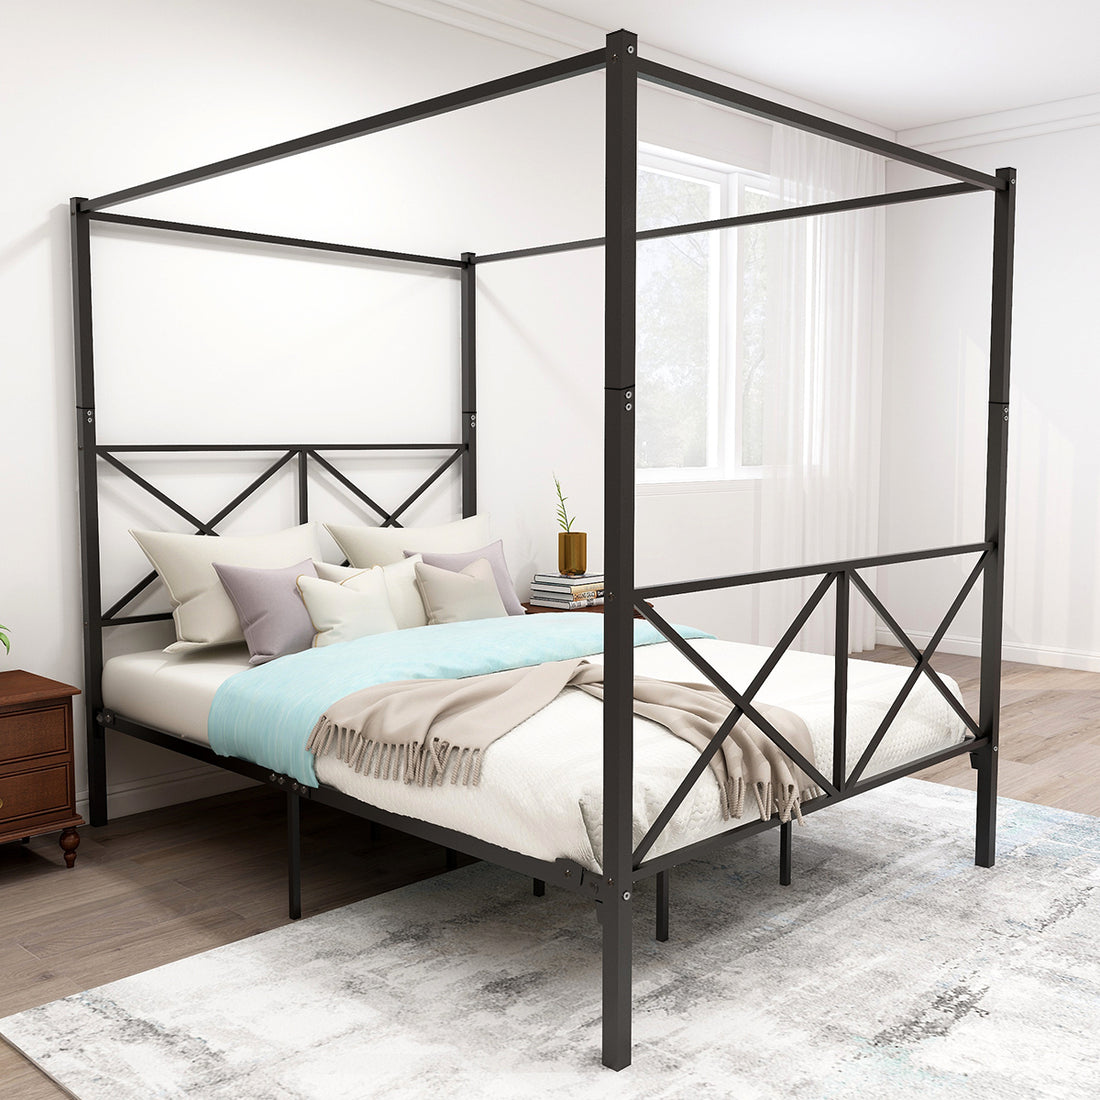 Metal Canopy Bed Frame, Platform Bed Frame Queen with box spring not